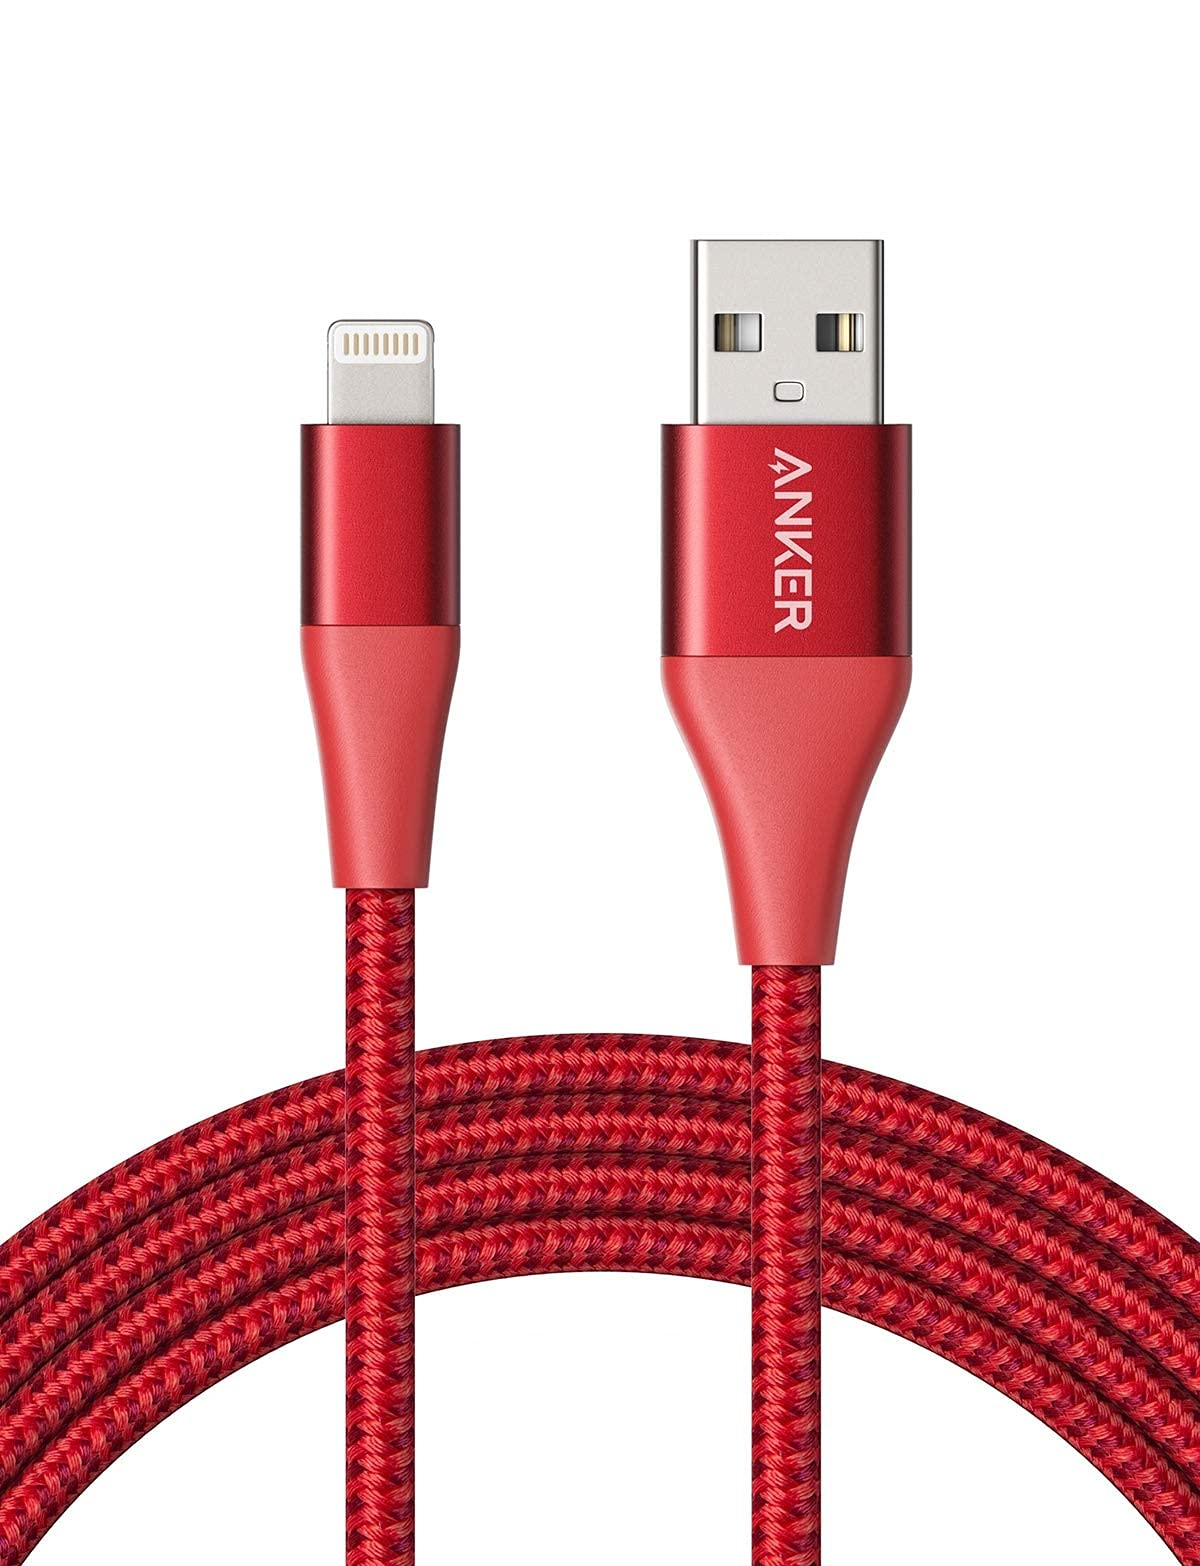 USB cable with a red X over it